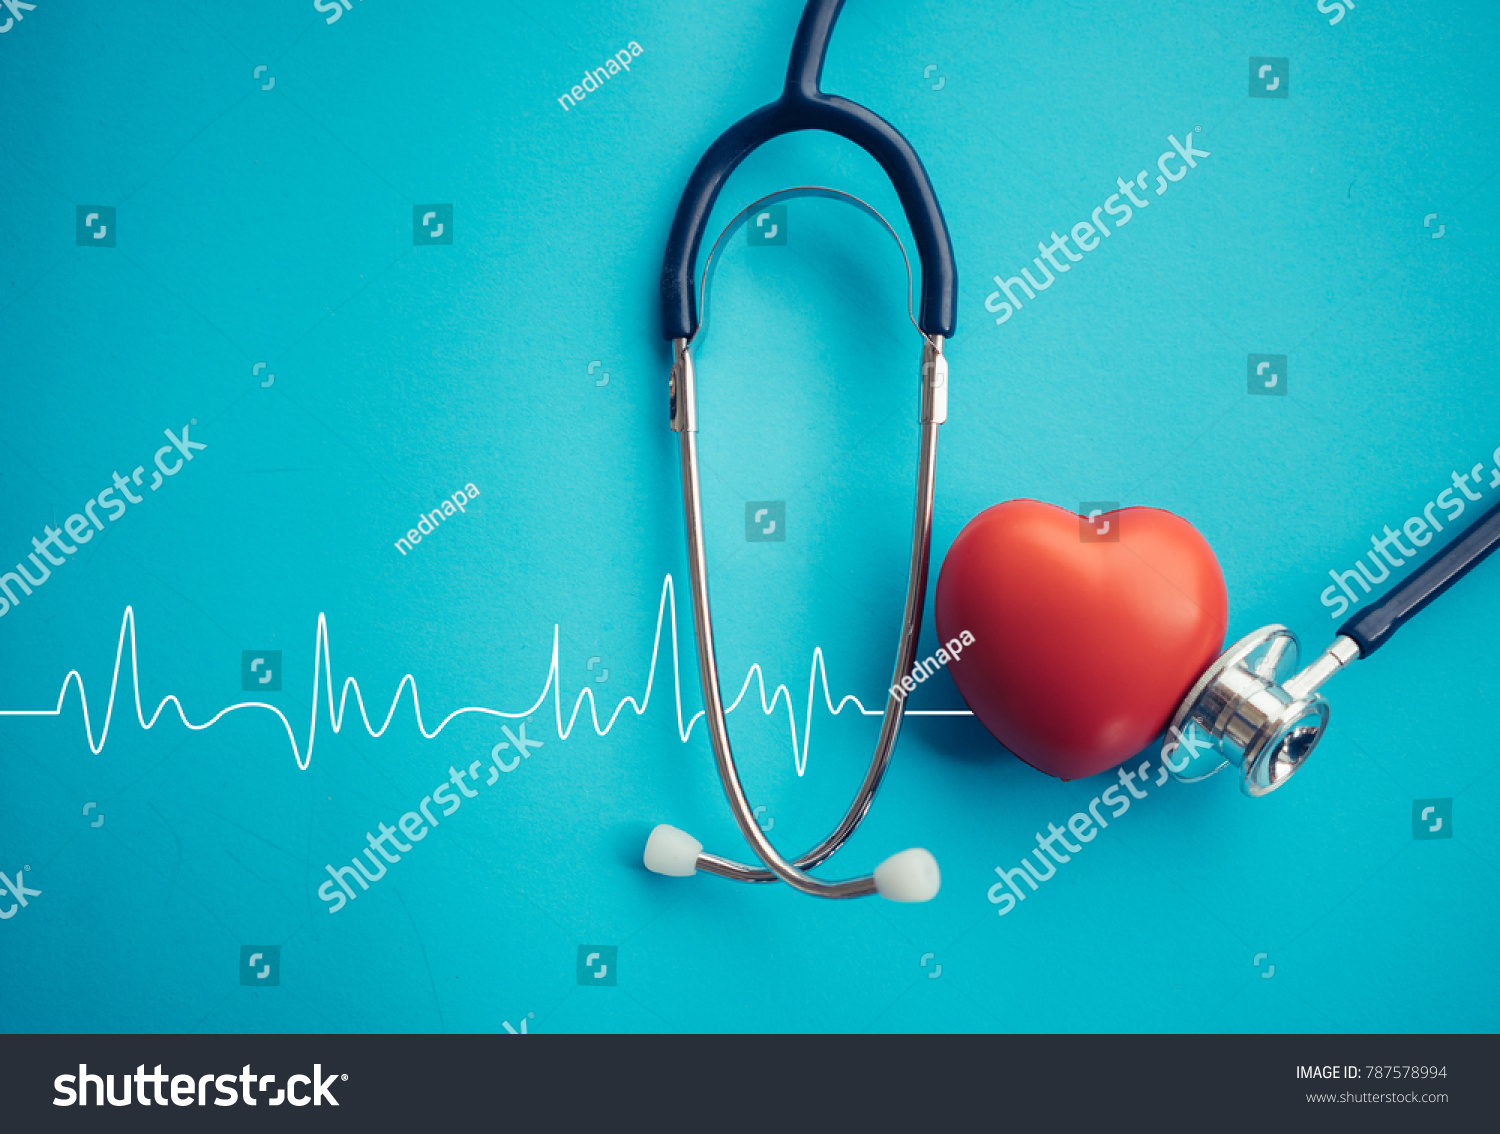 Heart and stethoscope,Heartbeat Line,Healthcare concept. #787578994